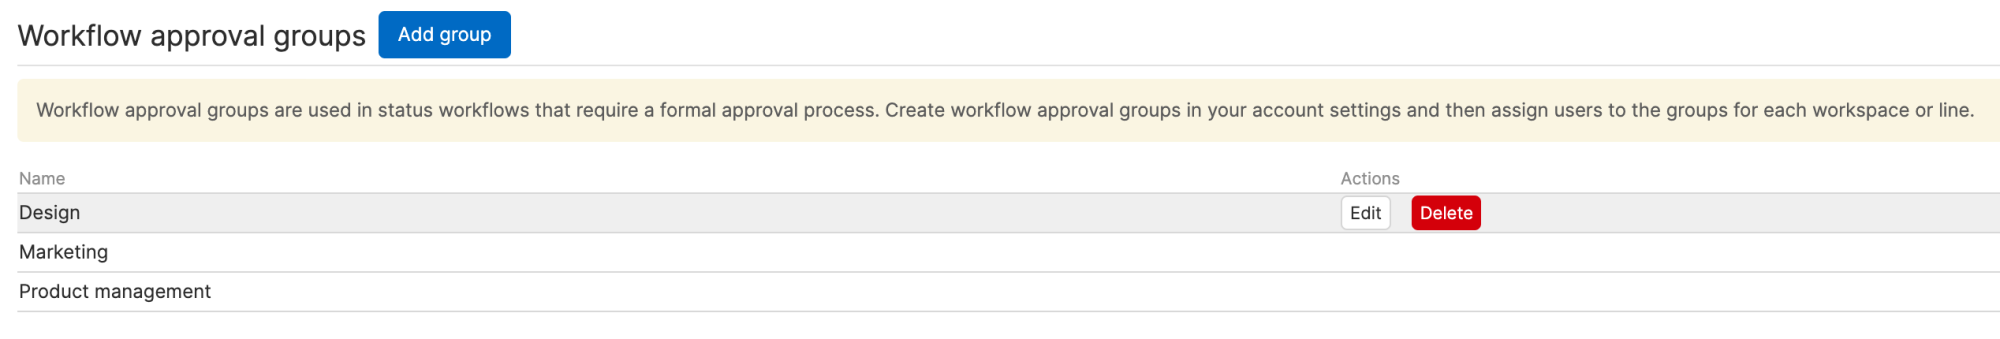 Aha! Ideas account workflow approval groups settings